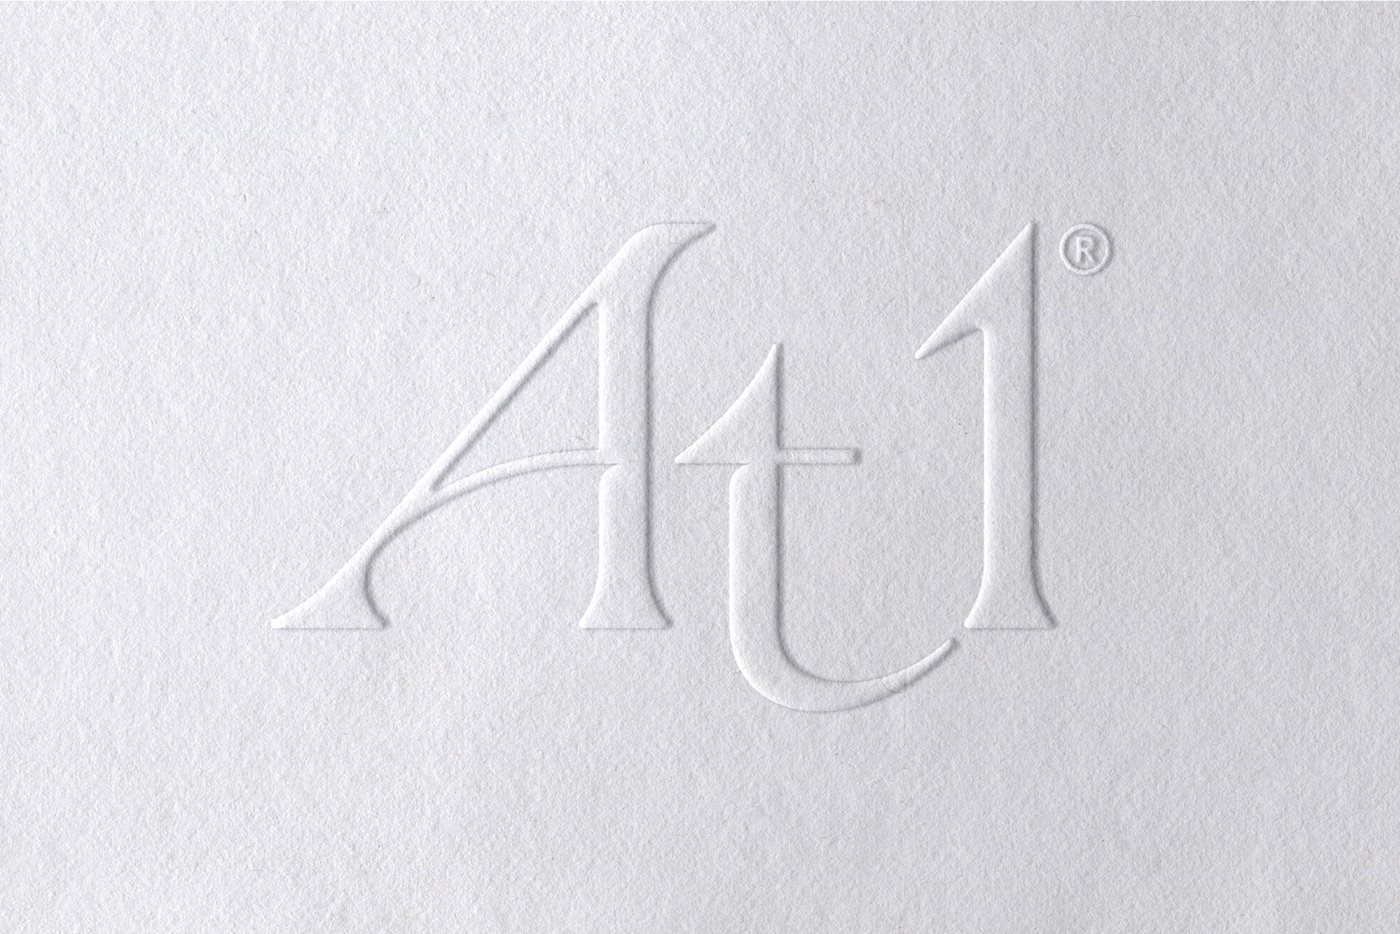 At1 logo embossed in to a white background